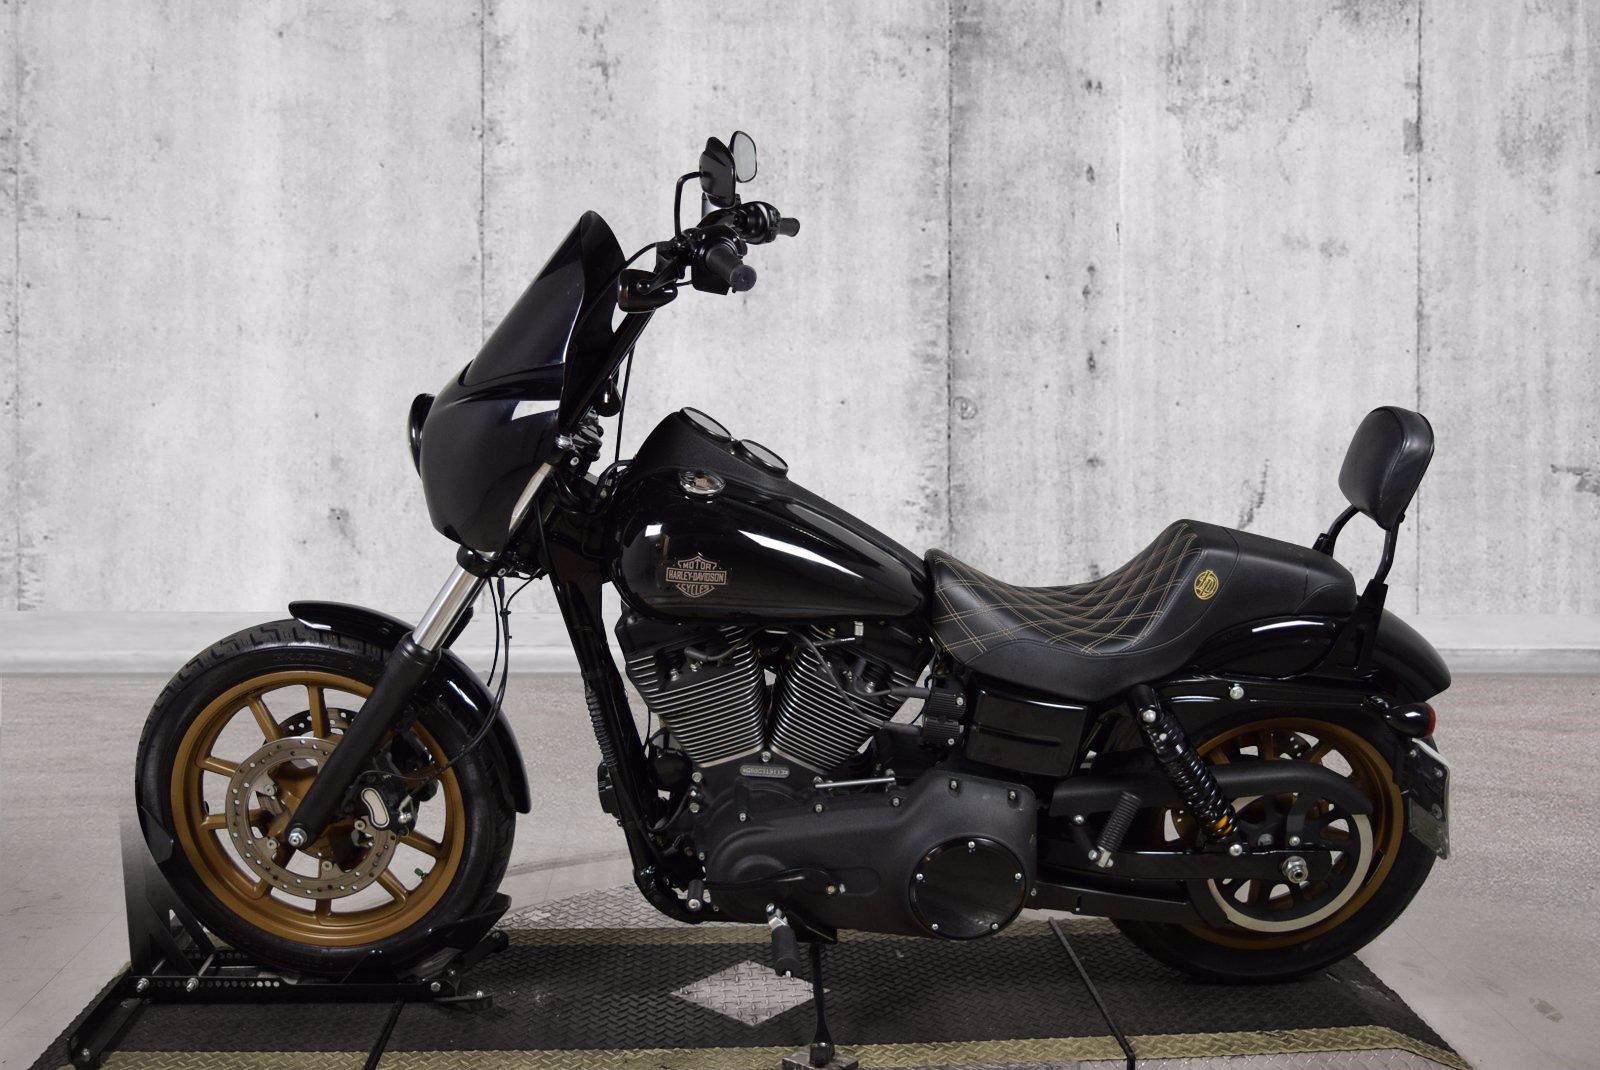 Pre-Owned 2016 Harley-Davidson Dyna Low Rider S FXDLS Dyna in Riverside ...